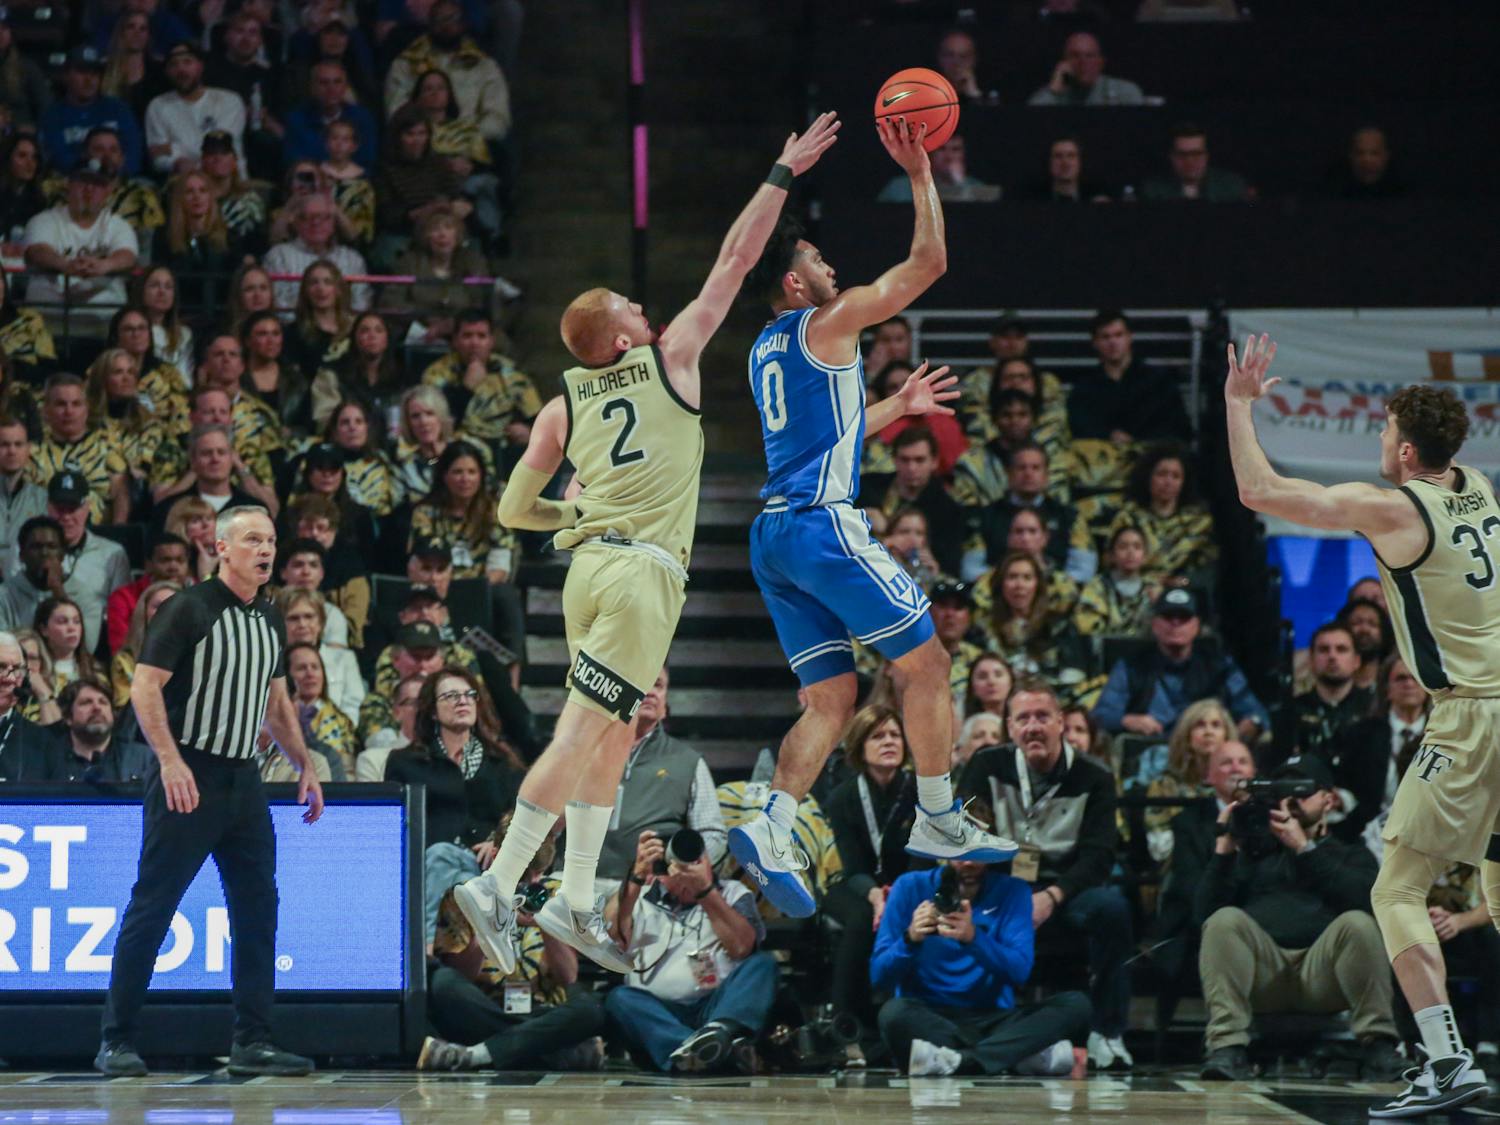 Freshman guard Jared McCain shoots a floater in Duke's game against Wake Forest.